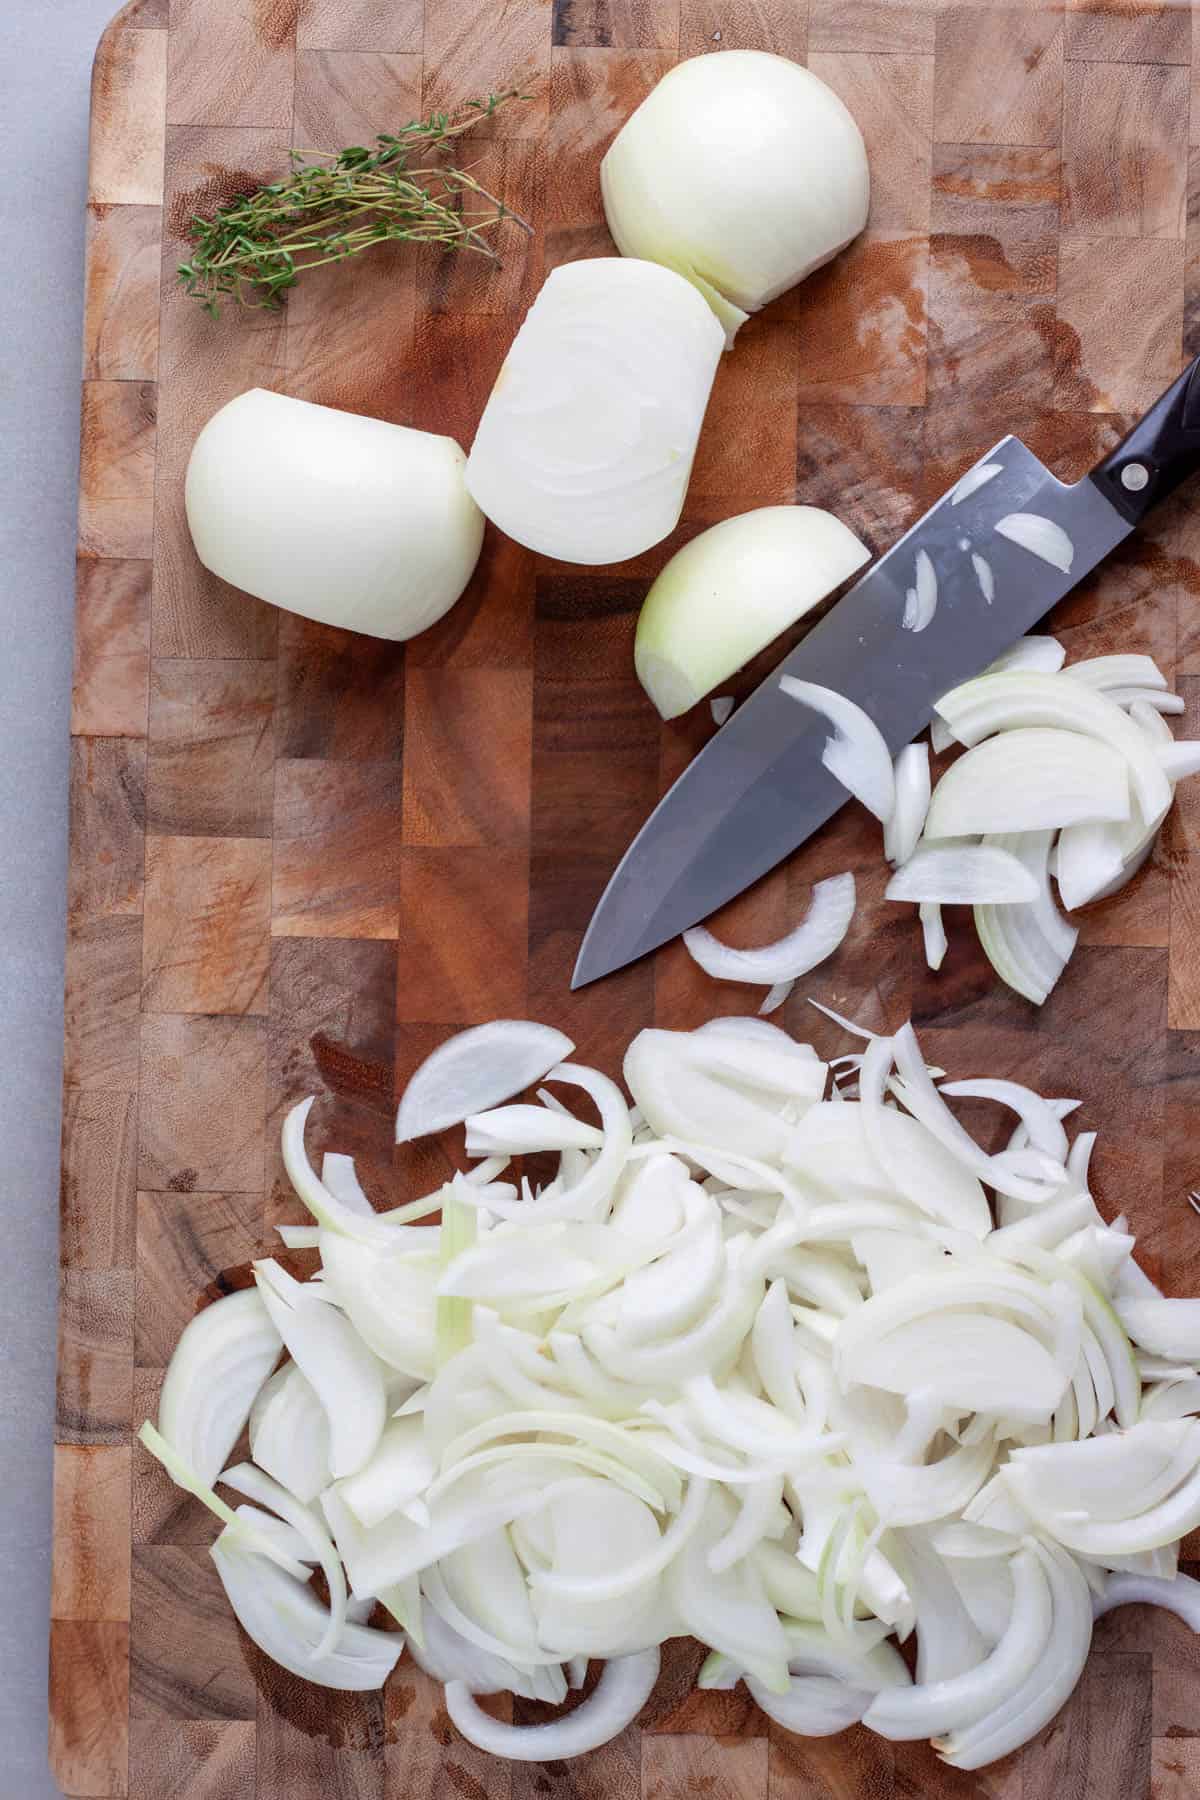 Onions getting sliced on a wooden cutting board ready to make caramelized onions.